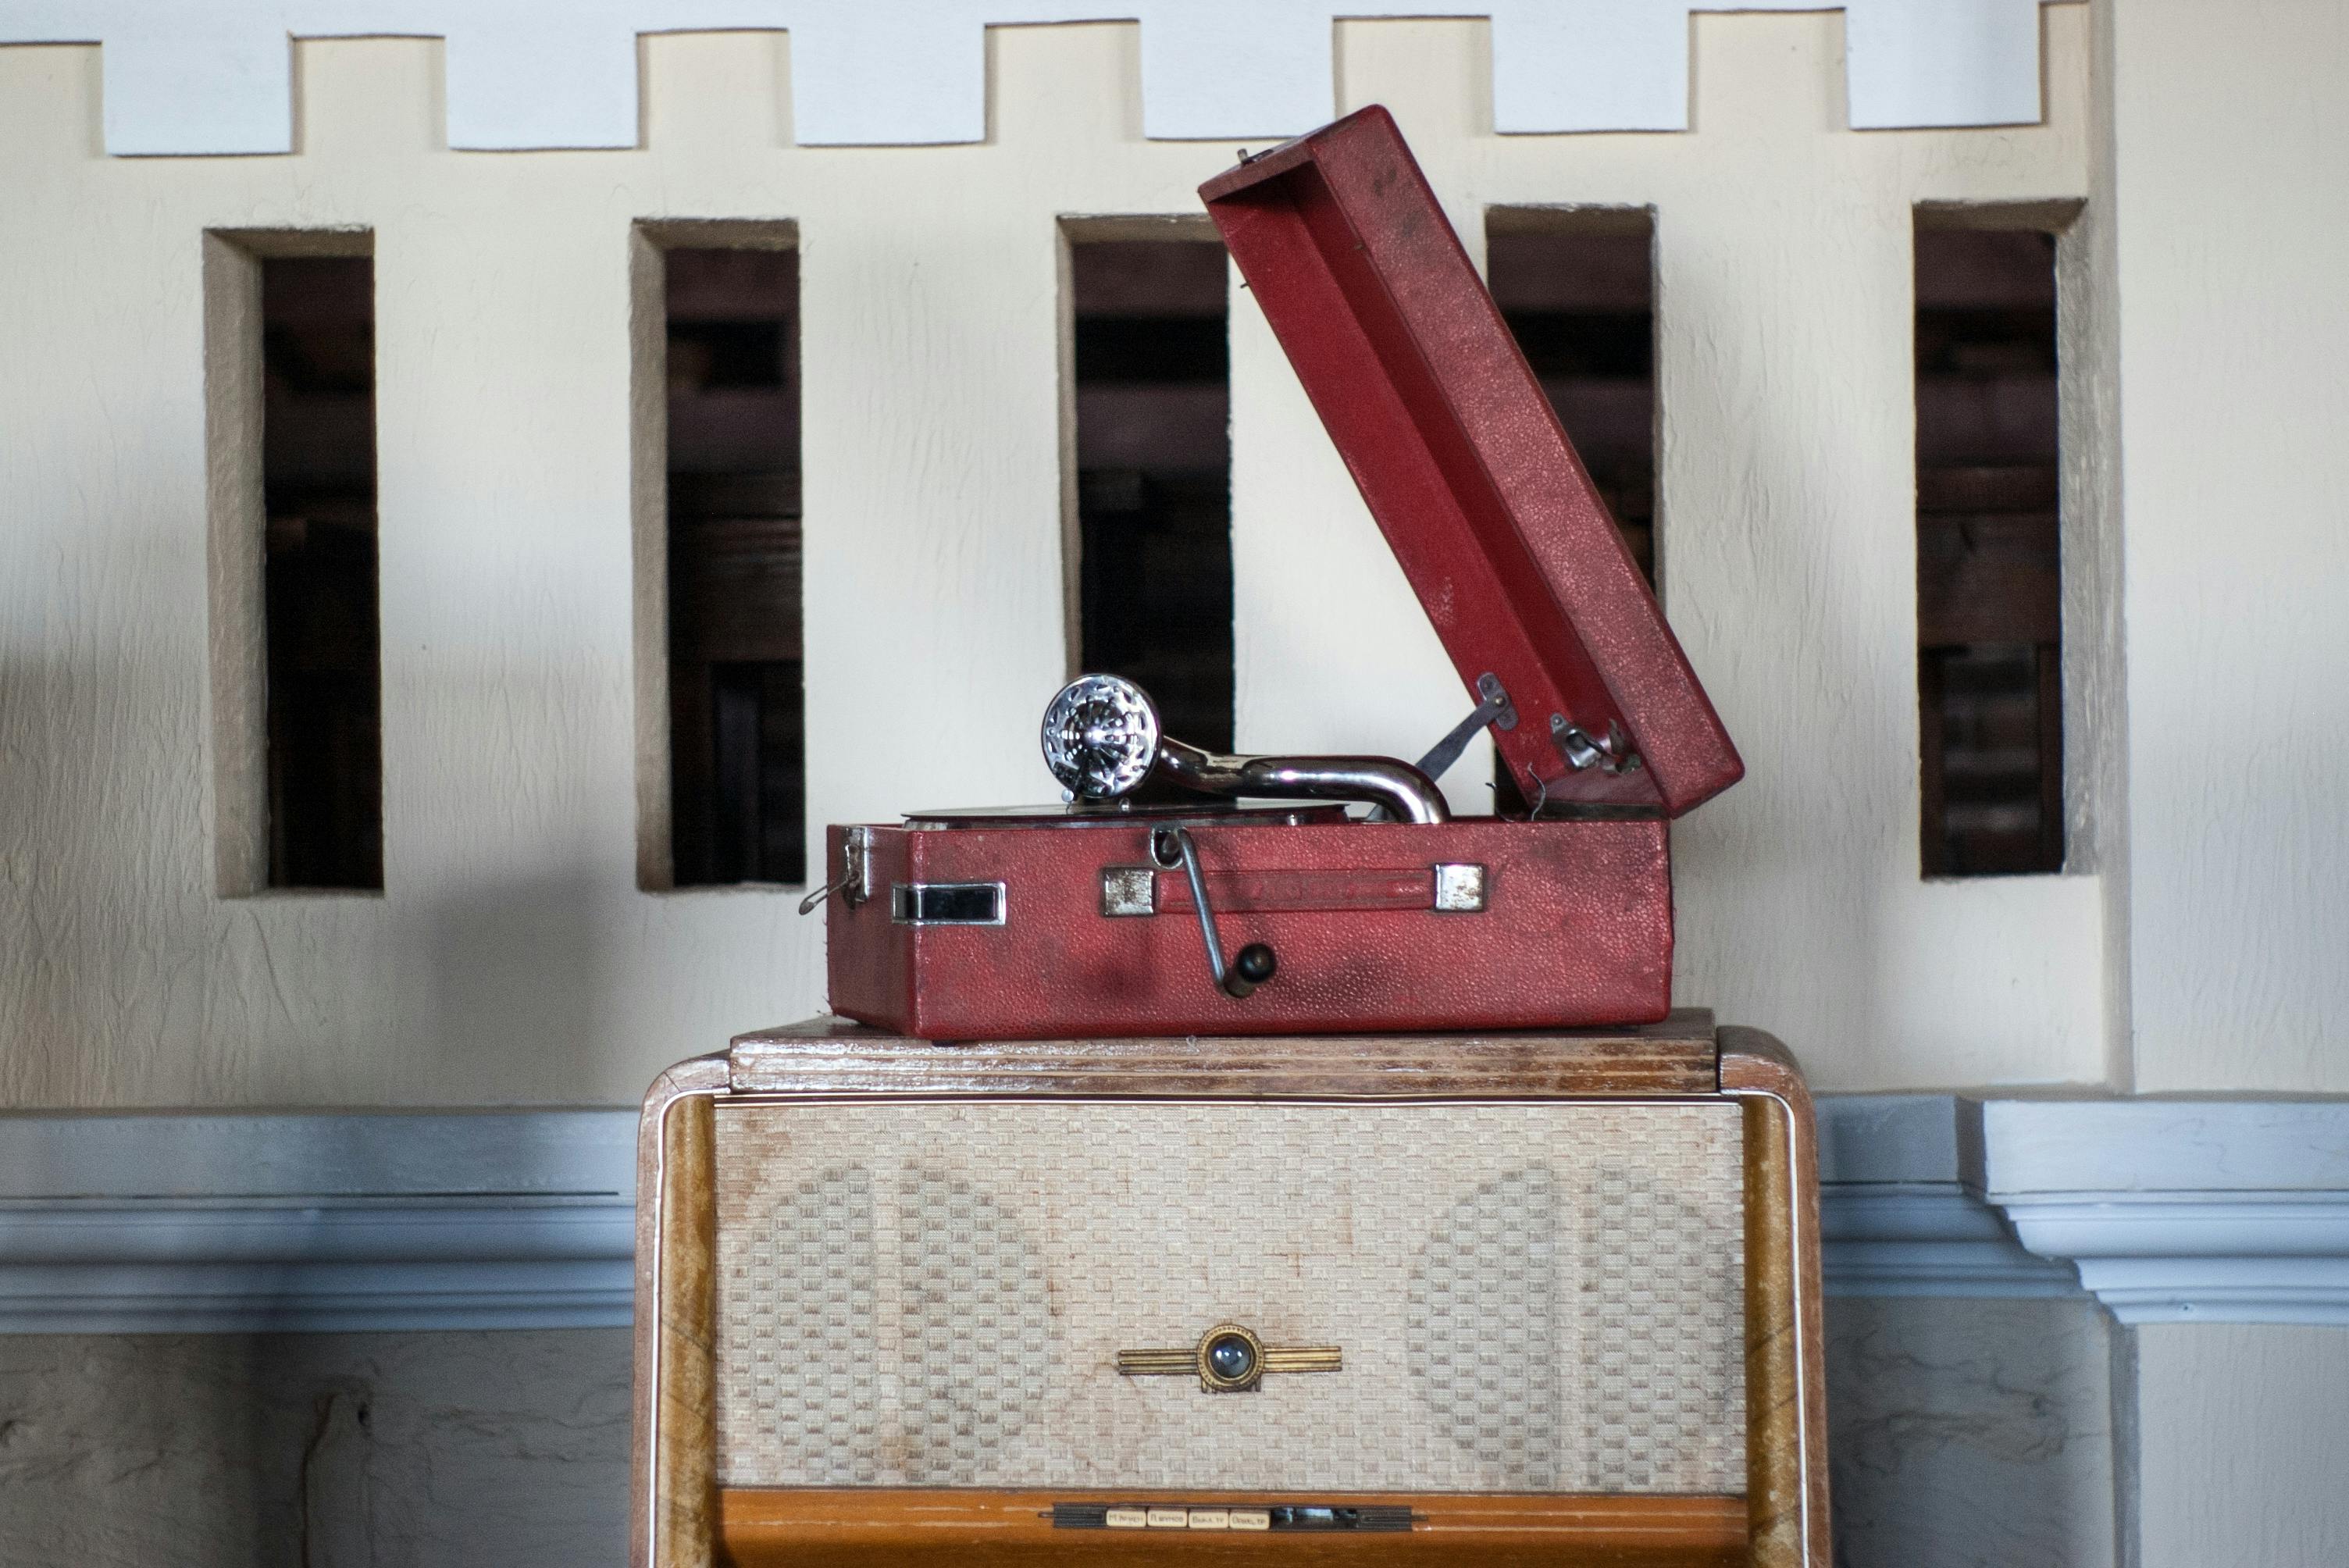 Free stock photo of Old school record player